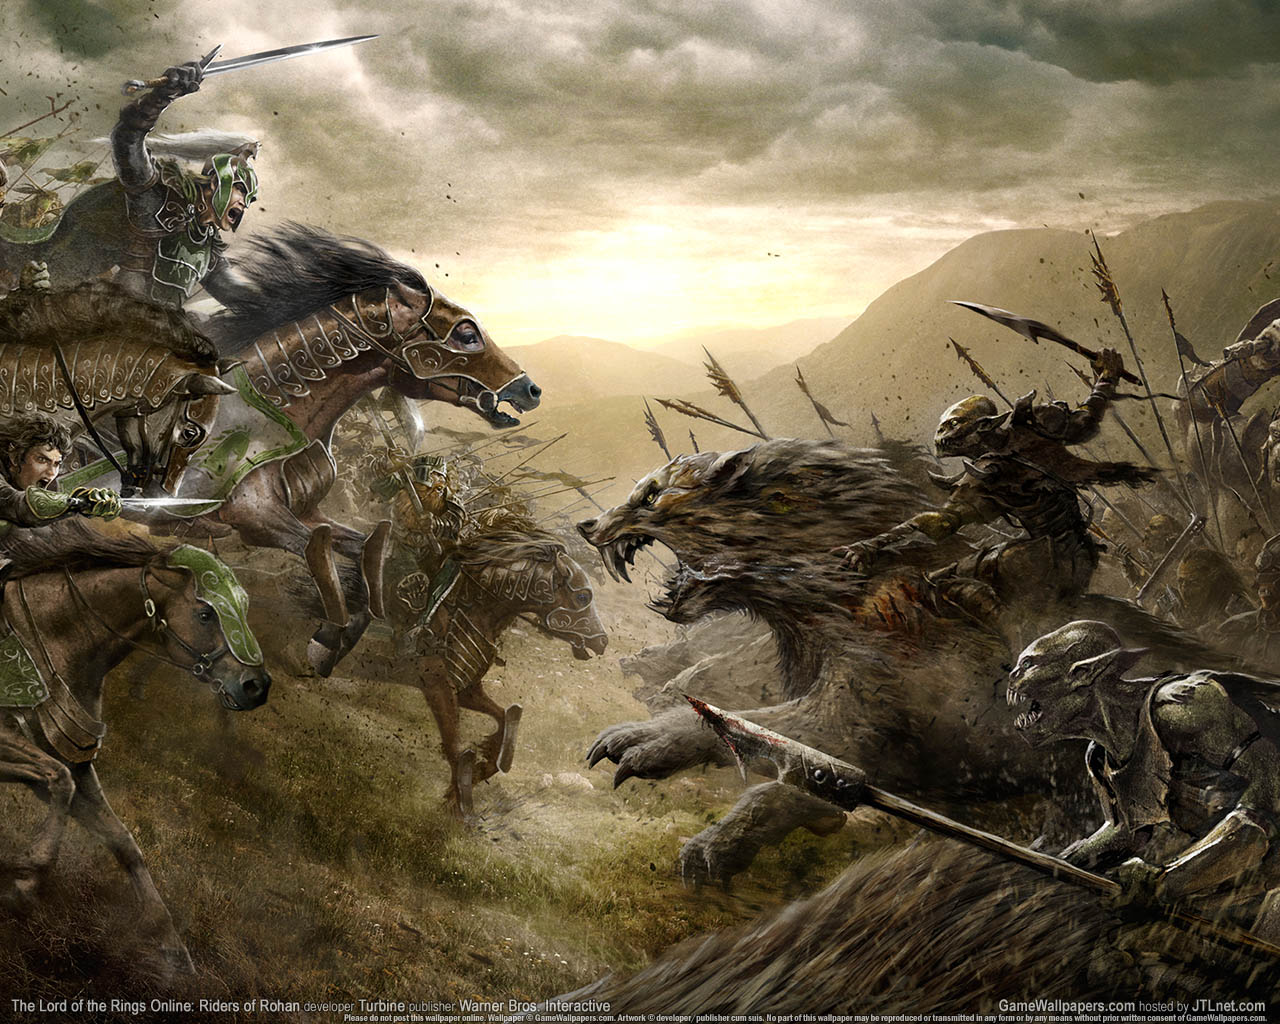 The Lord of the Rings Online%3A Riders of Rohan wallpaper 01 1280x1024